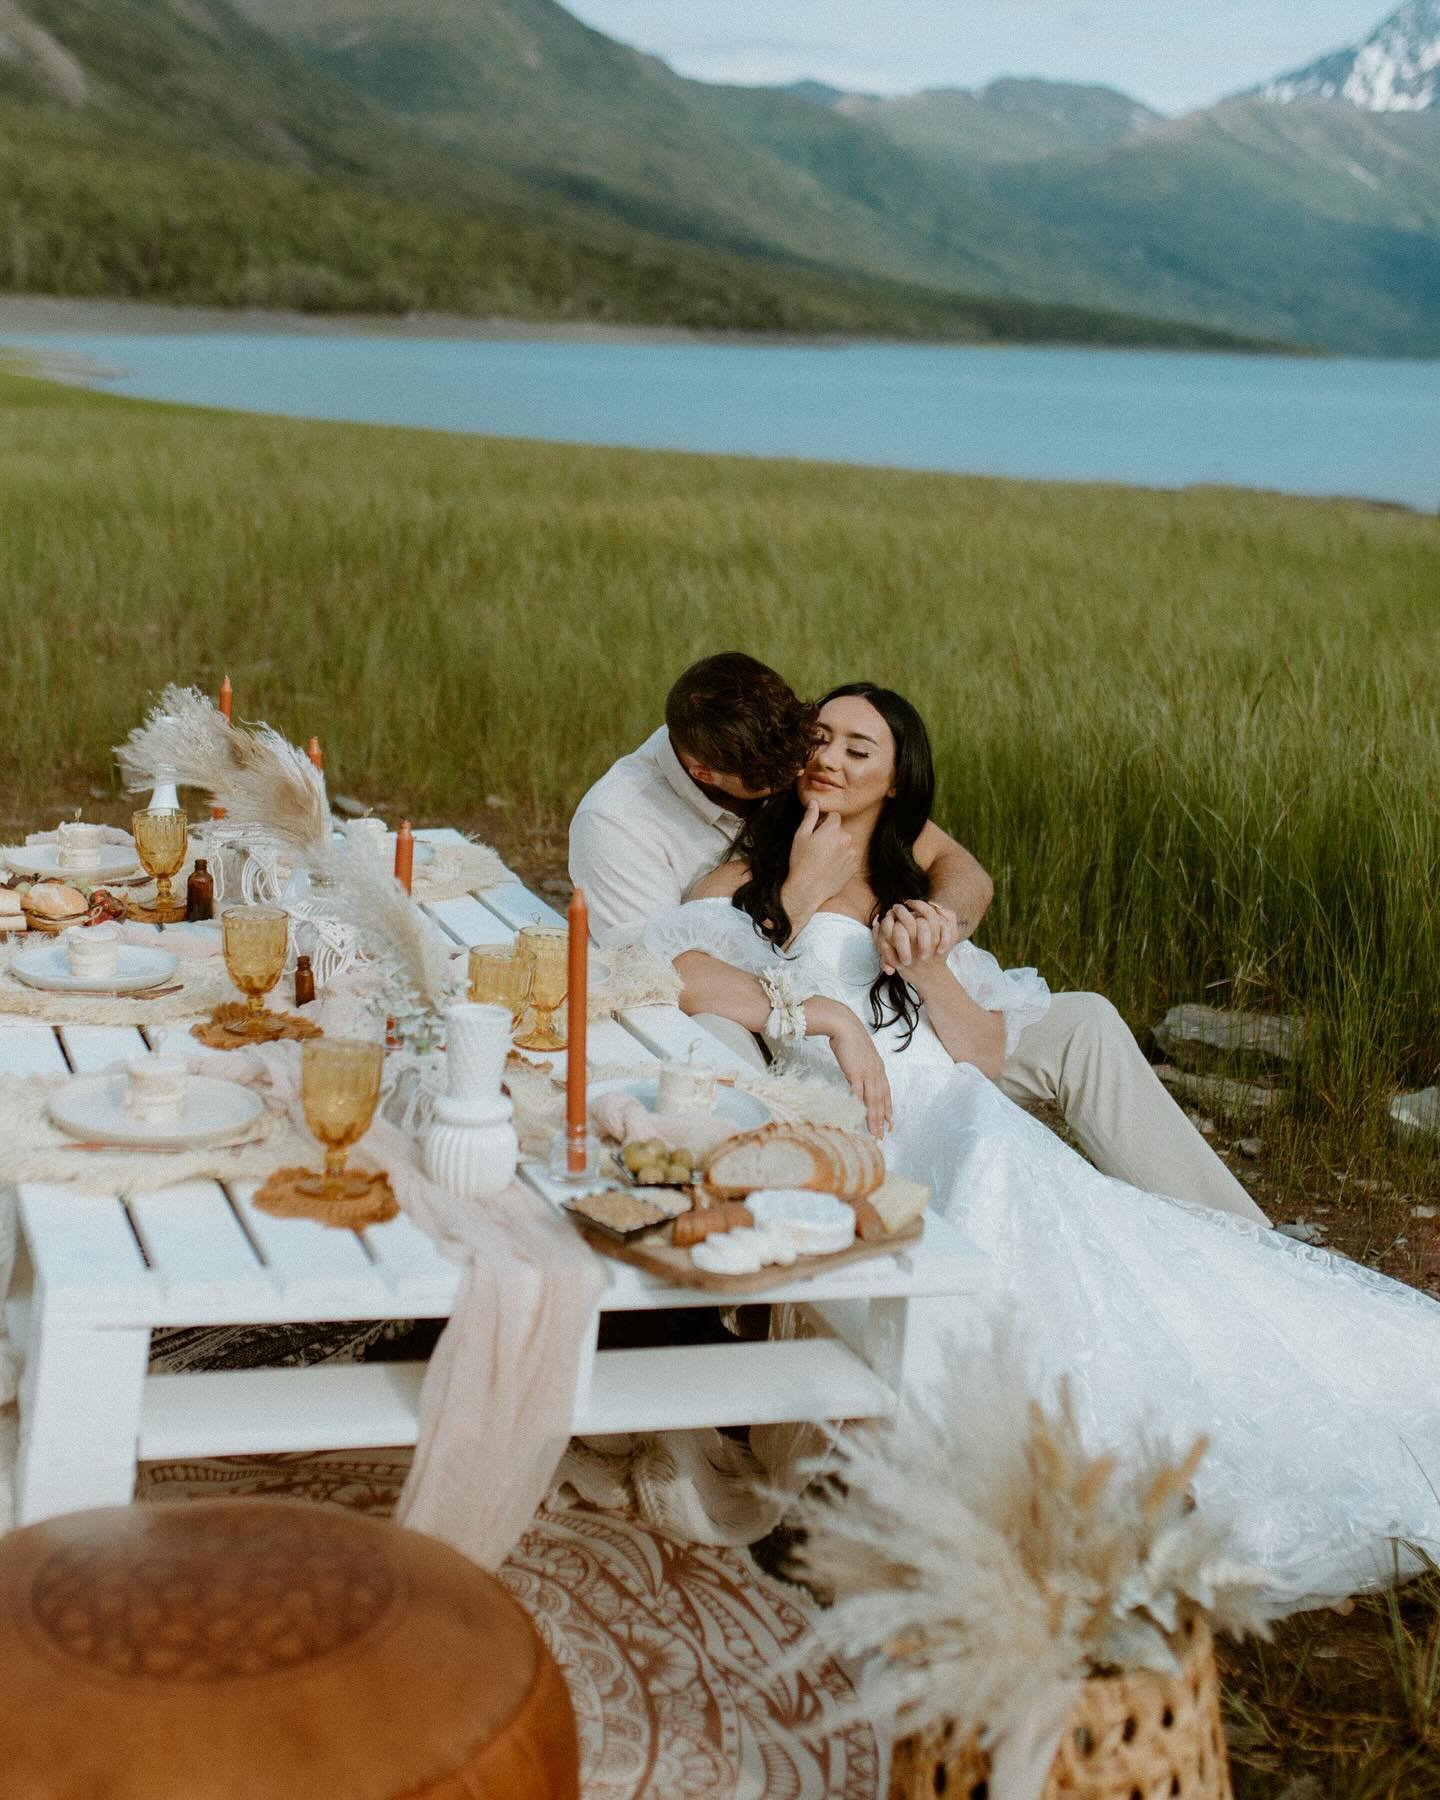 ✨ Lakeside dreaming ✨

Photographer: @thehitchedhiker 
Planning/Styling: @akhappenings 
Florals: @wildpoppyak 

#alaskabride #alaskabridalshop #evieyoung #eveiyoungbridal #lakesideelopement #alaskaelopement